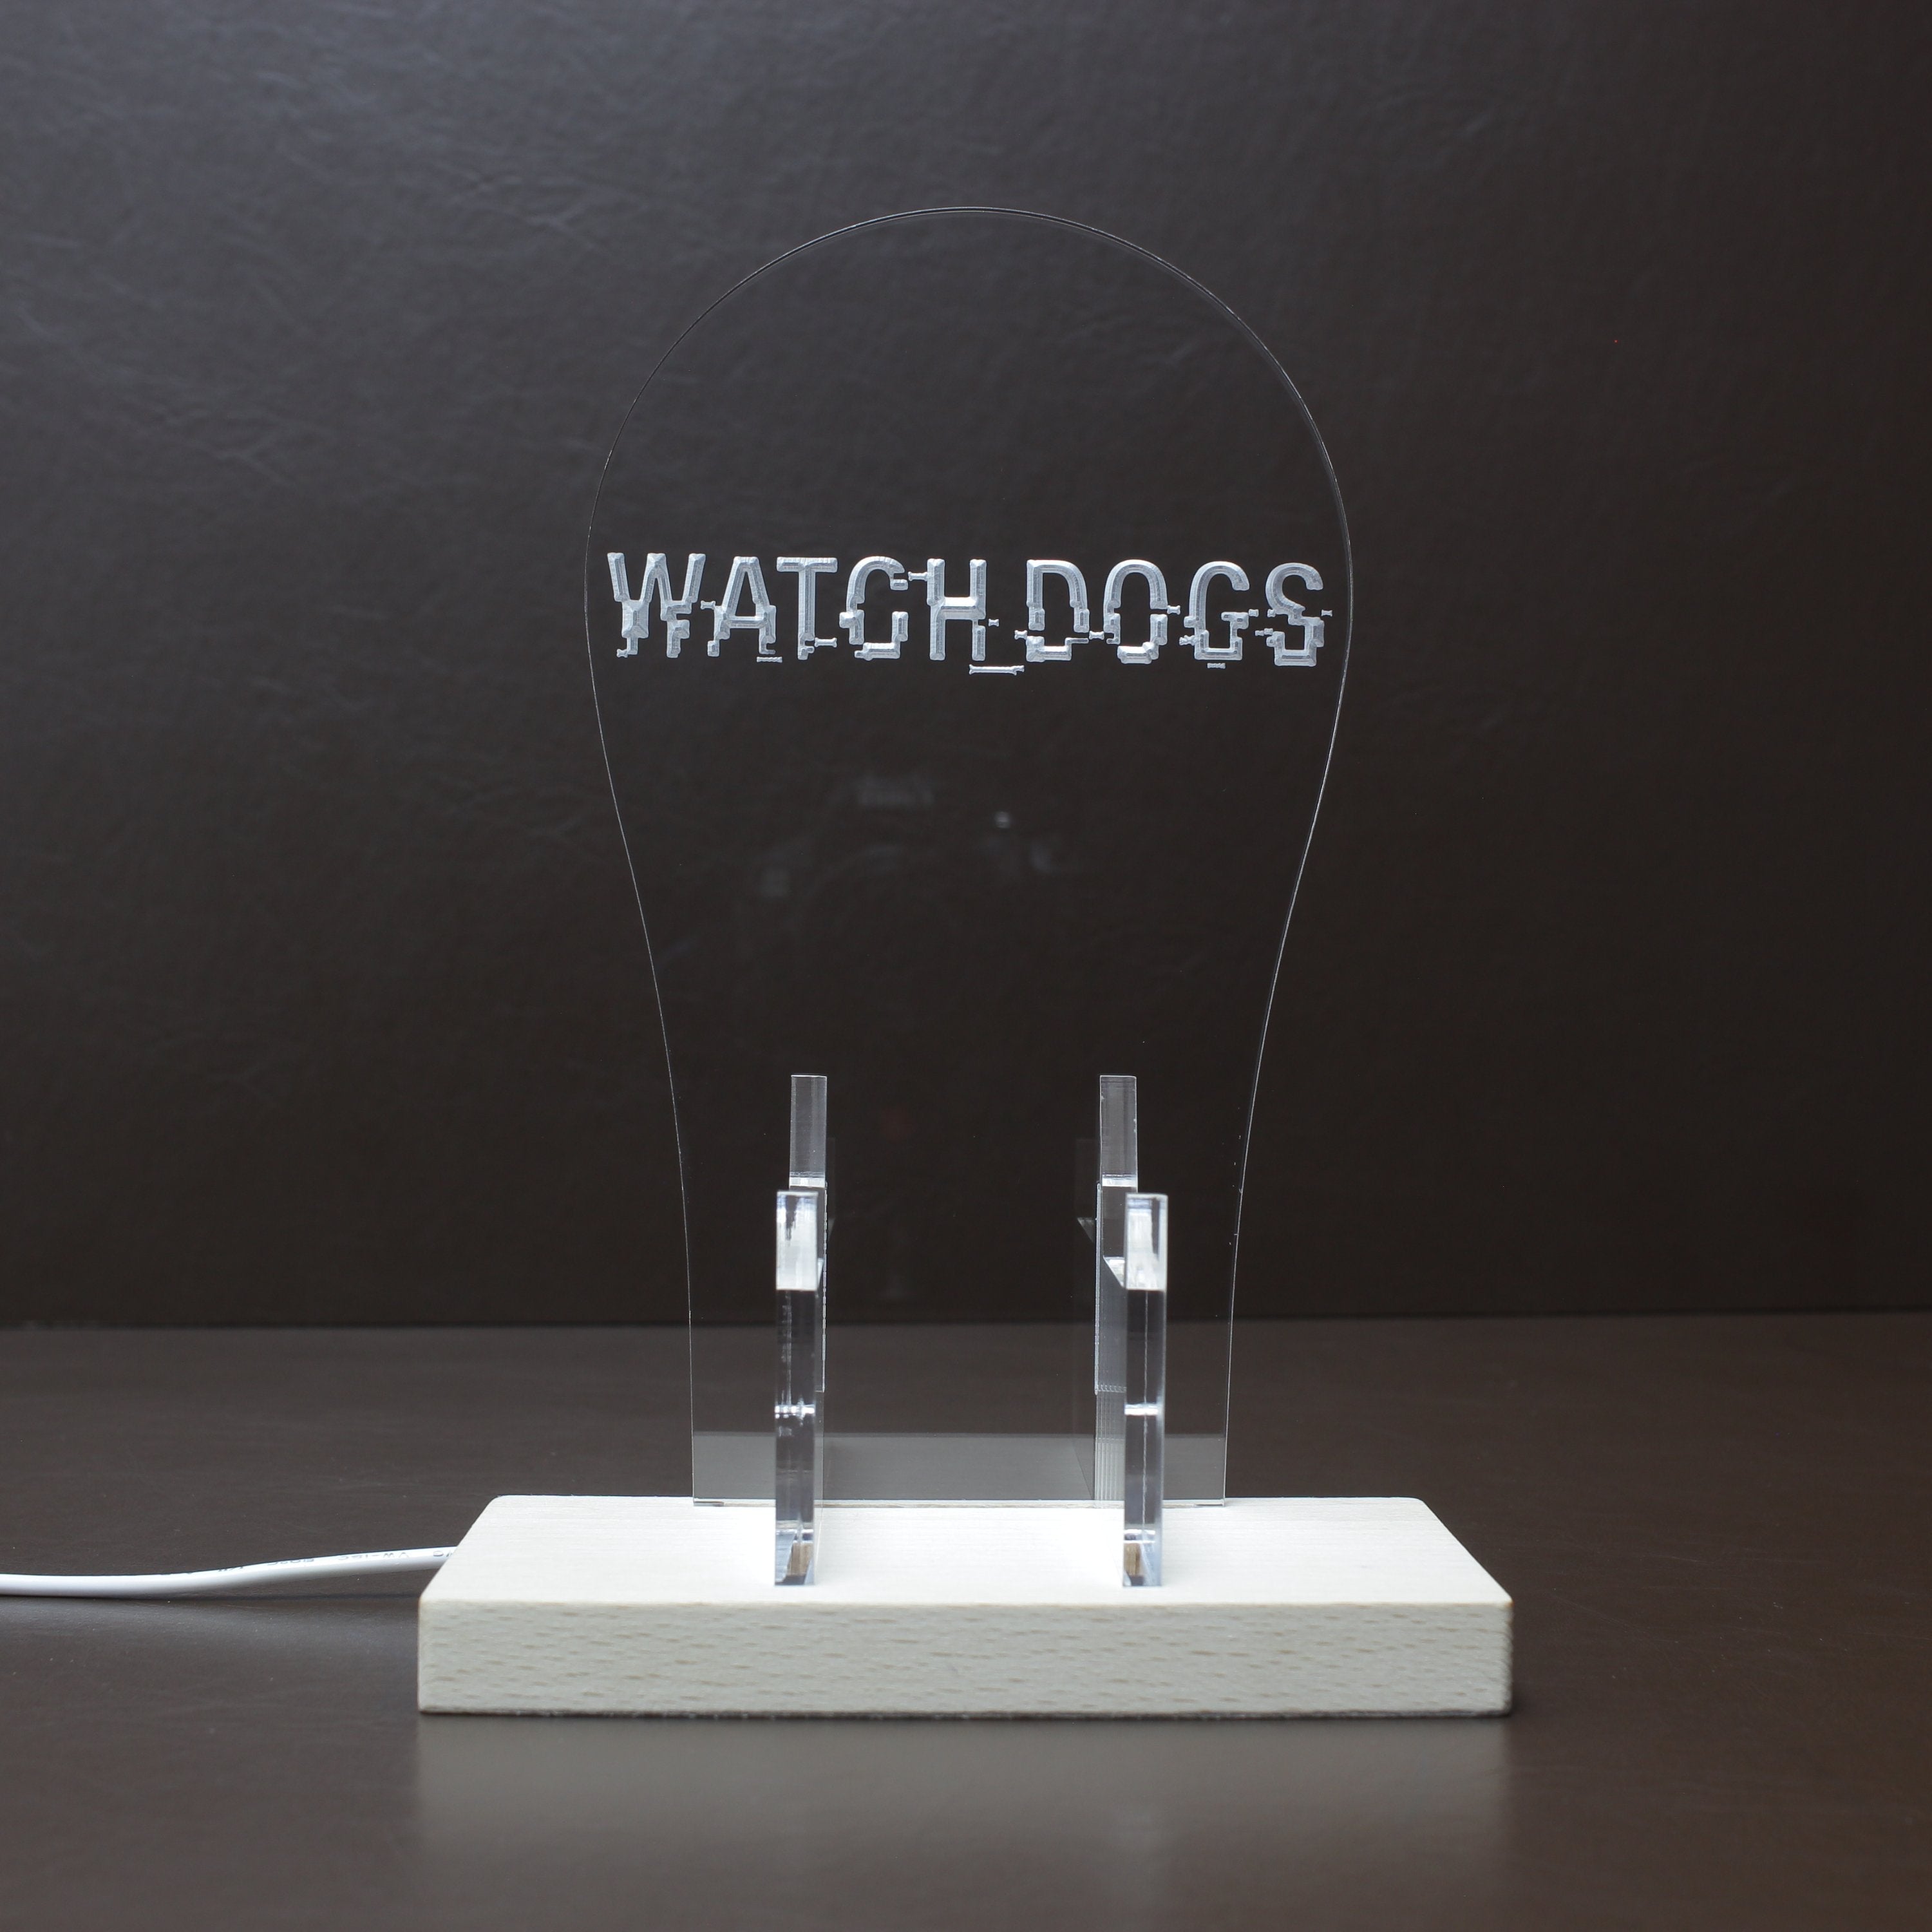 WATCH DOGS LED Gaming Headset Controller Stand